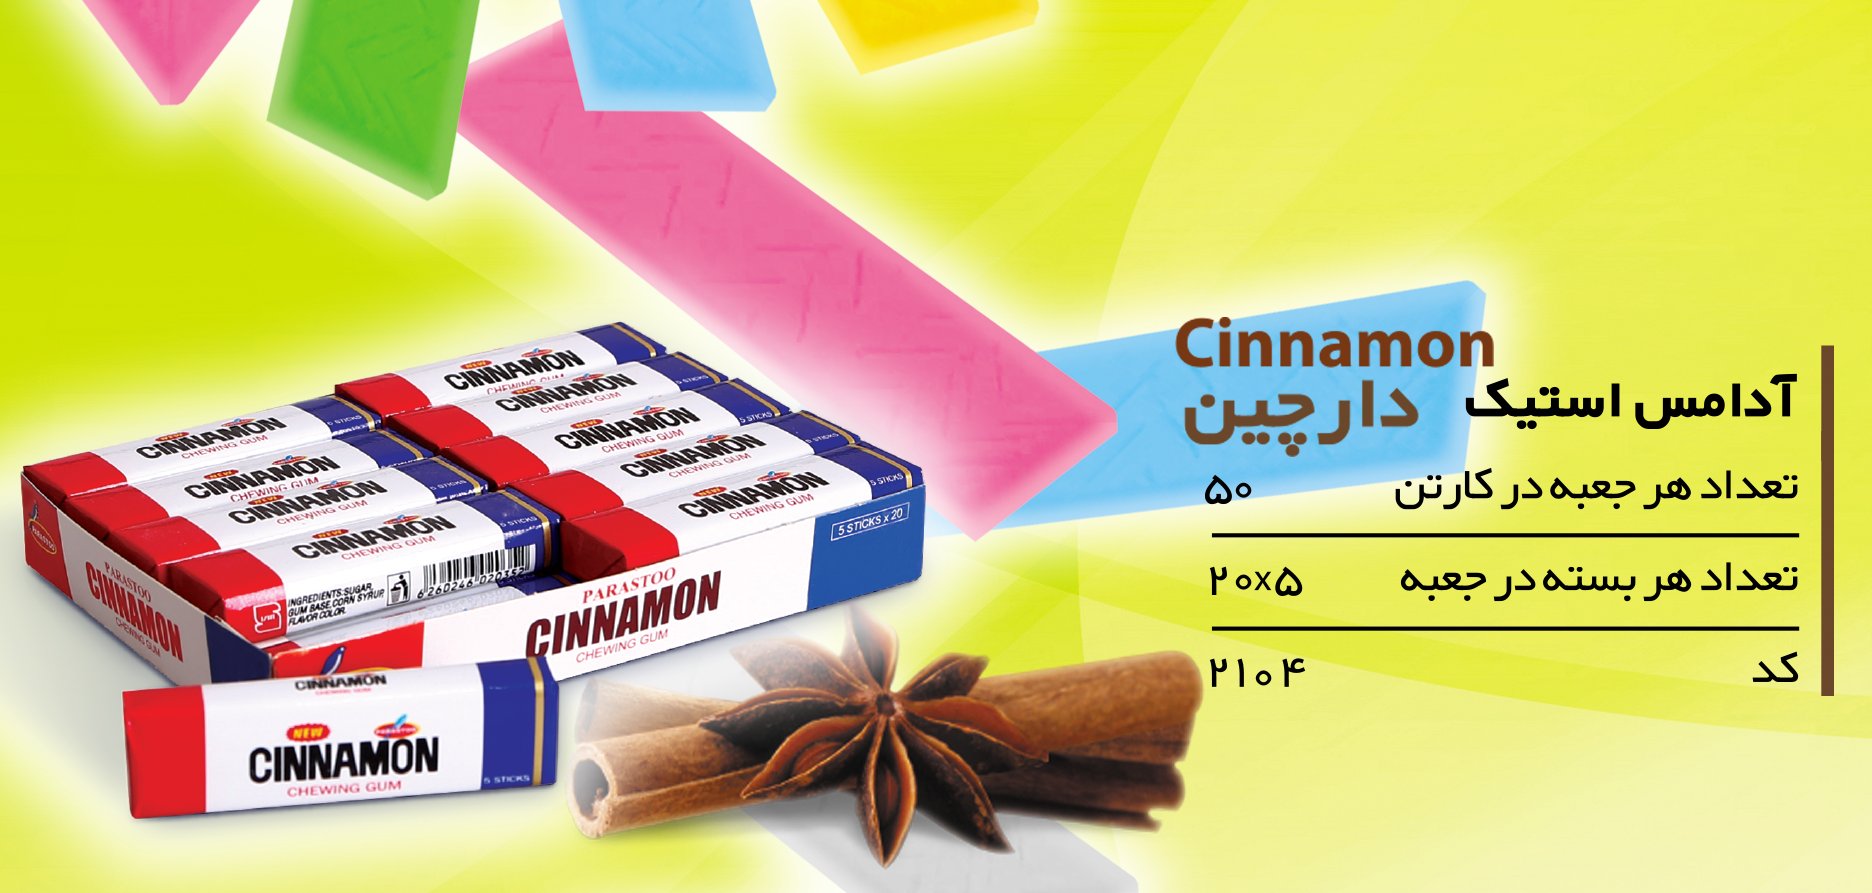 Chewing gum with cinnamon flavor